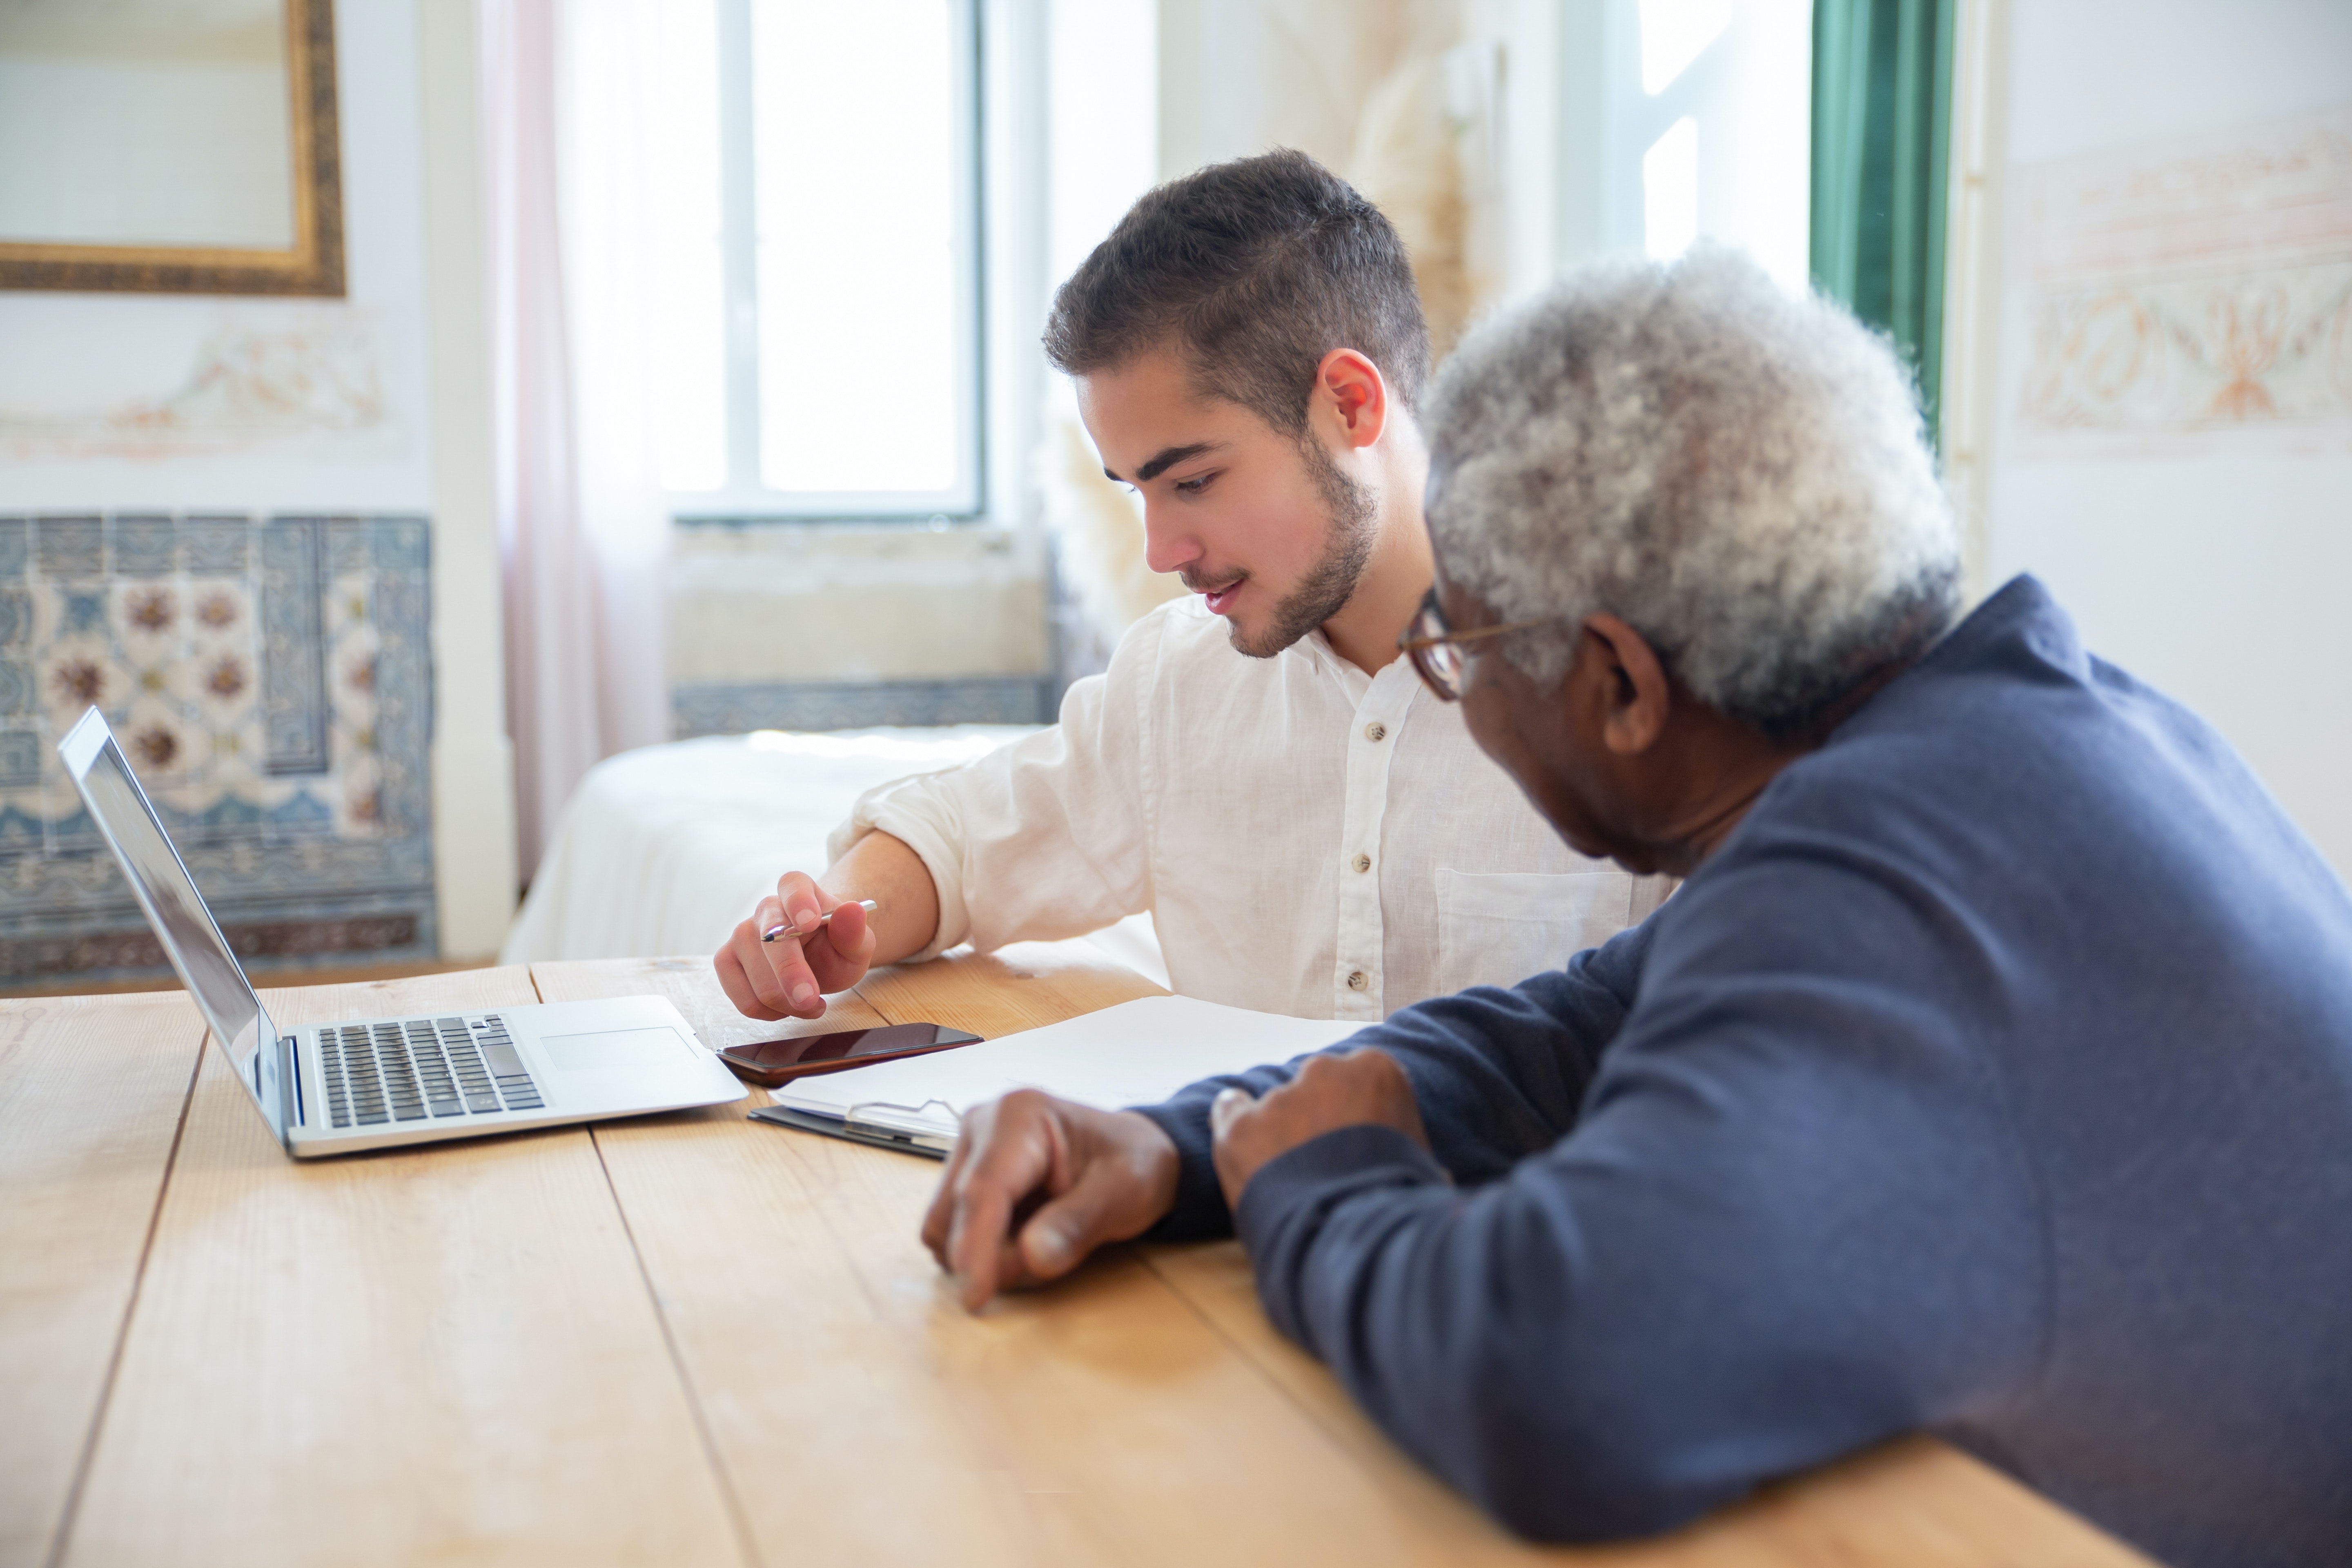 Young man discussing documents with an elderly person at a table with a laptop, a situation that could pertain to the legal distinctions between nursing home abuse and neglect.